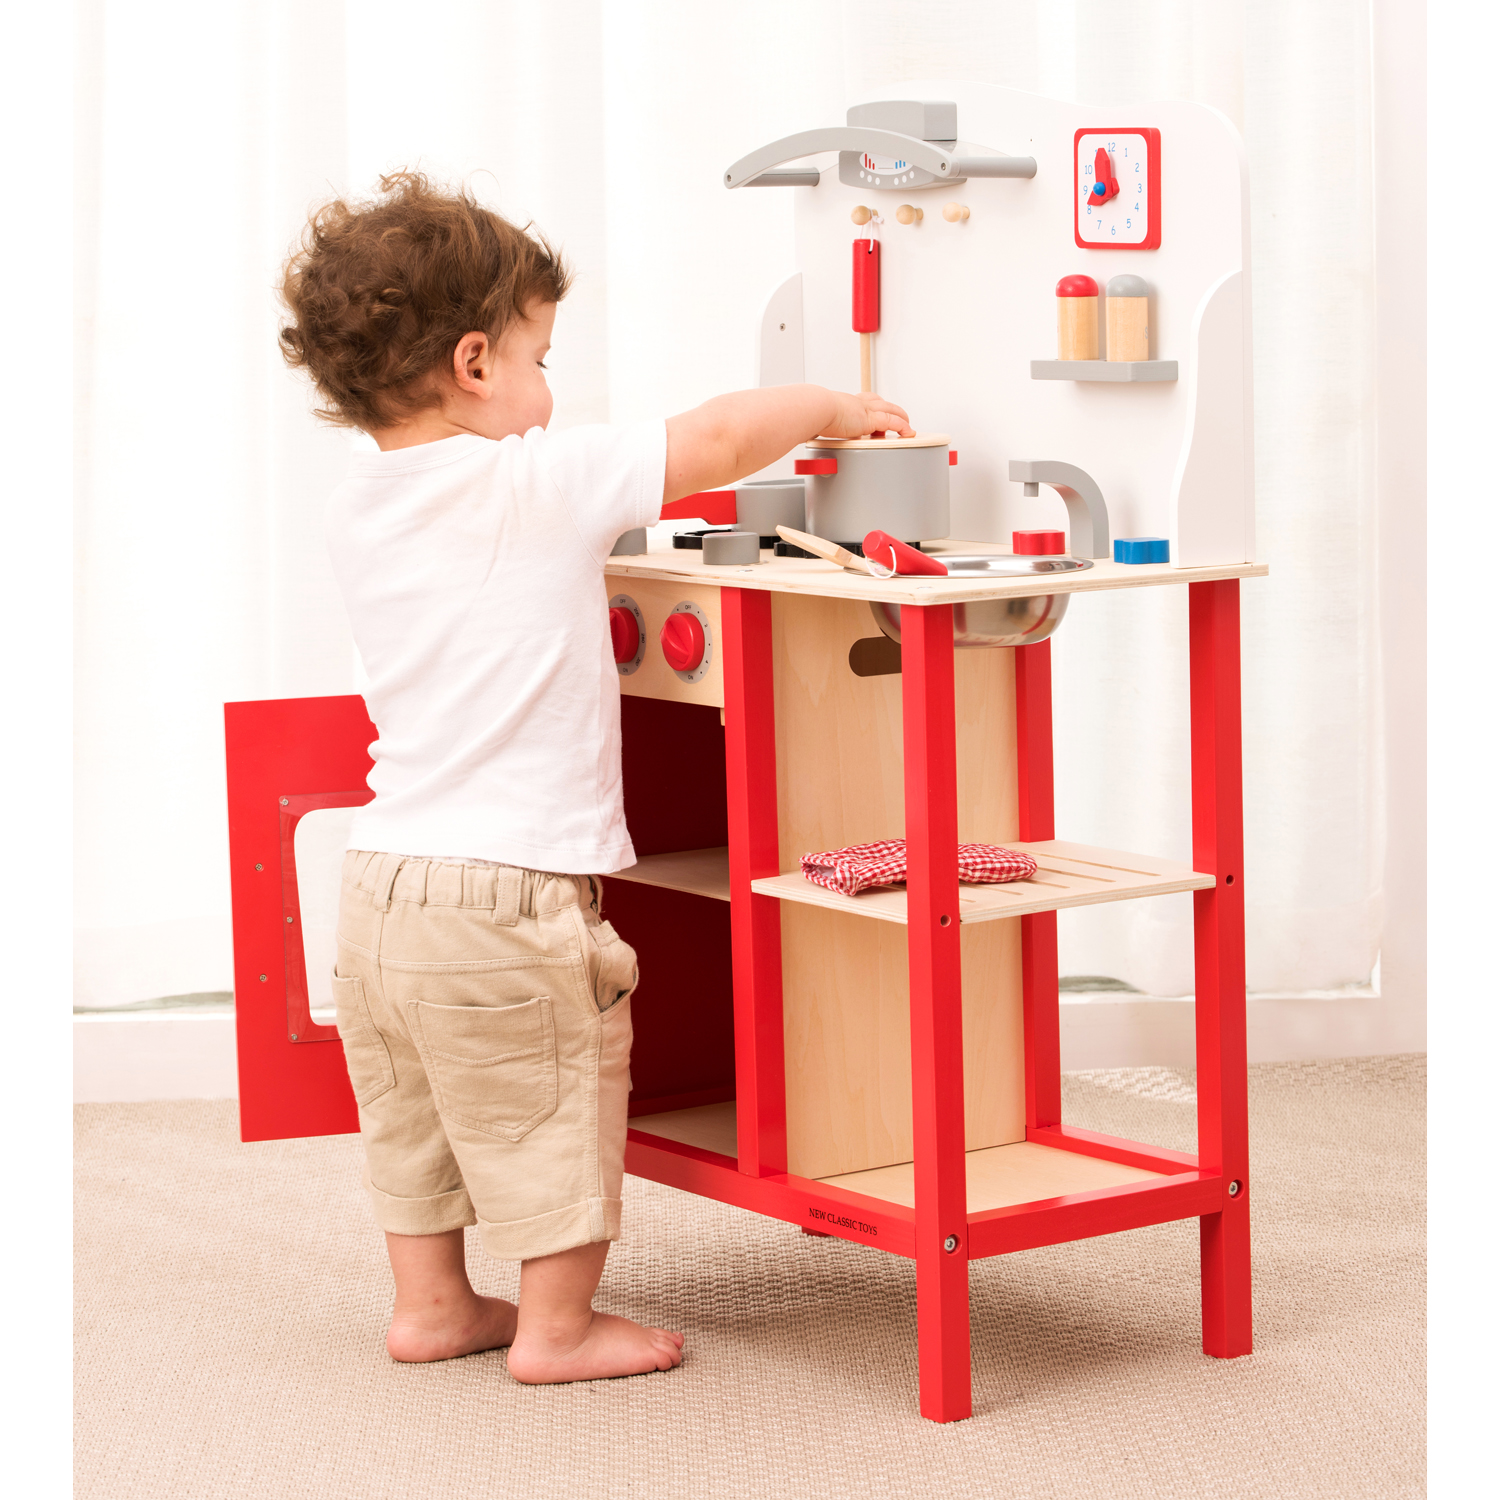 Cucina New classic toys Kitchenette